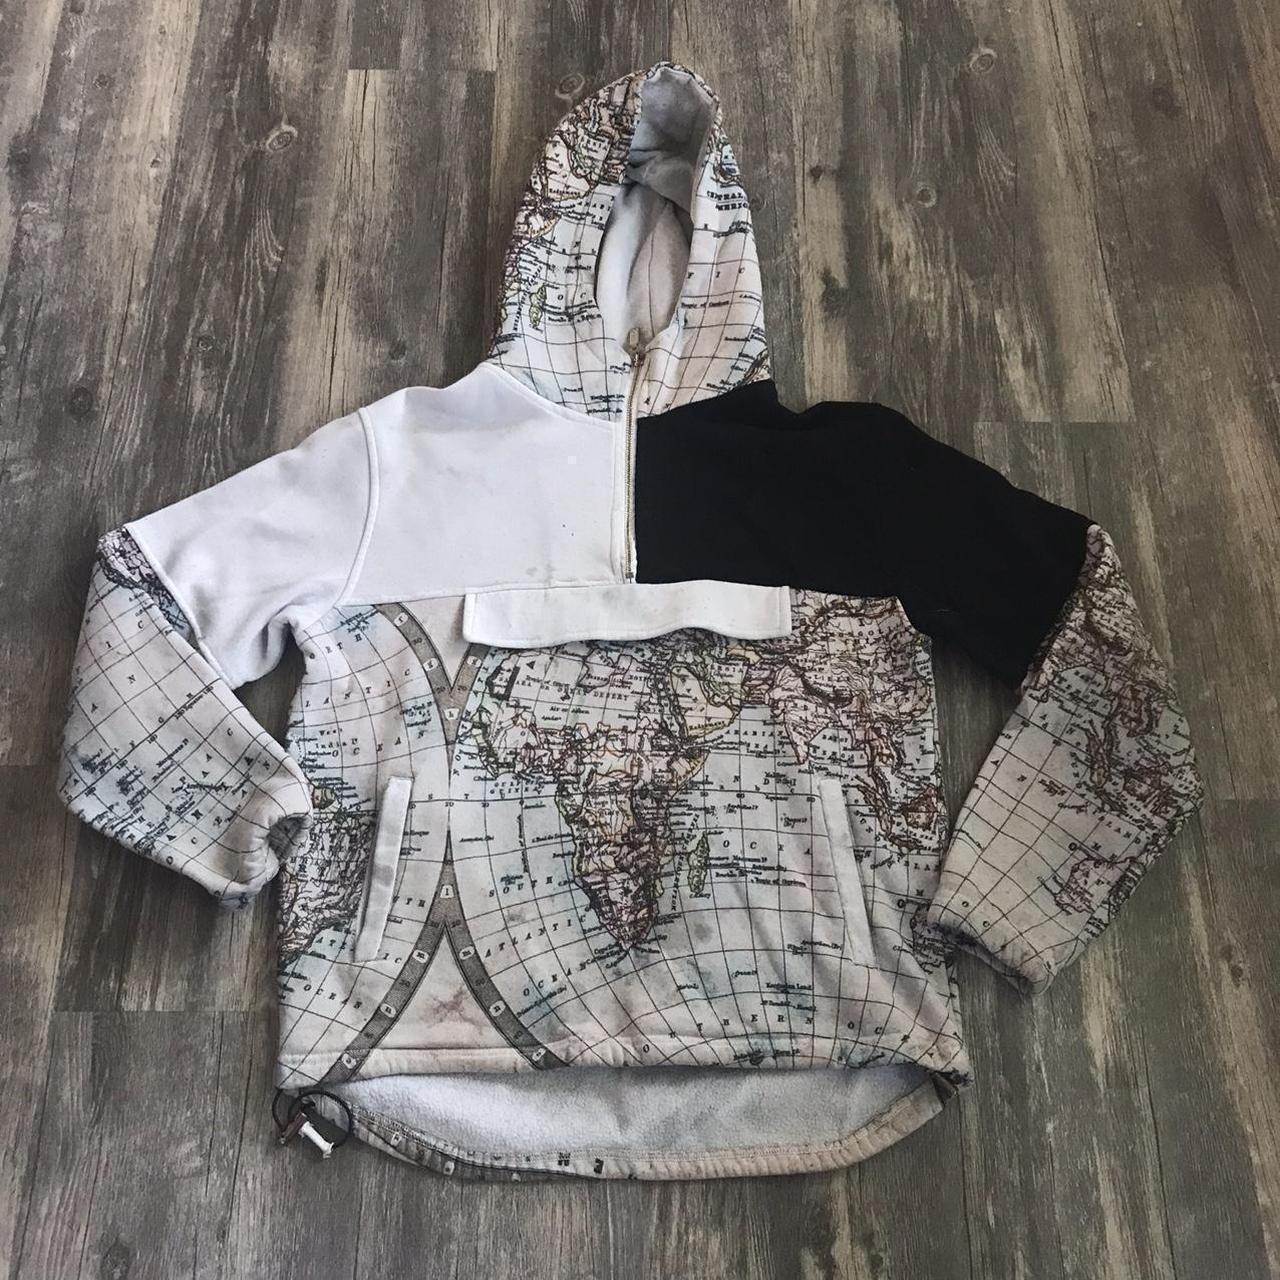 Louis Vuitton Graphic Hooded Pullover